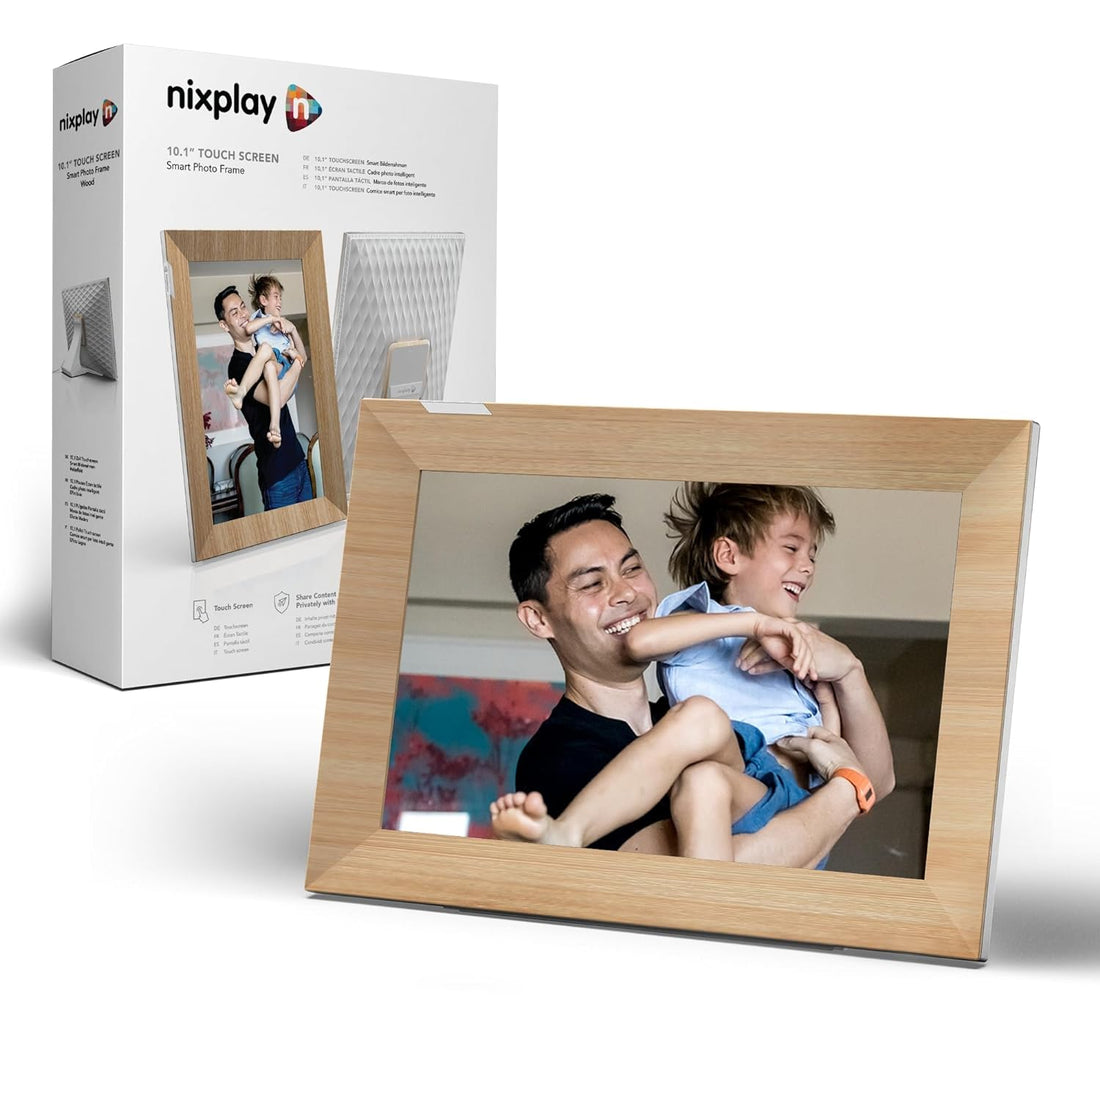 Nixplay 10.1” Digital Photo Frame - Connecting Families & Friends (White/Wood)